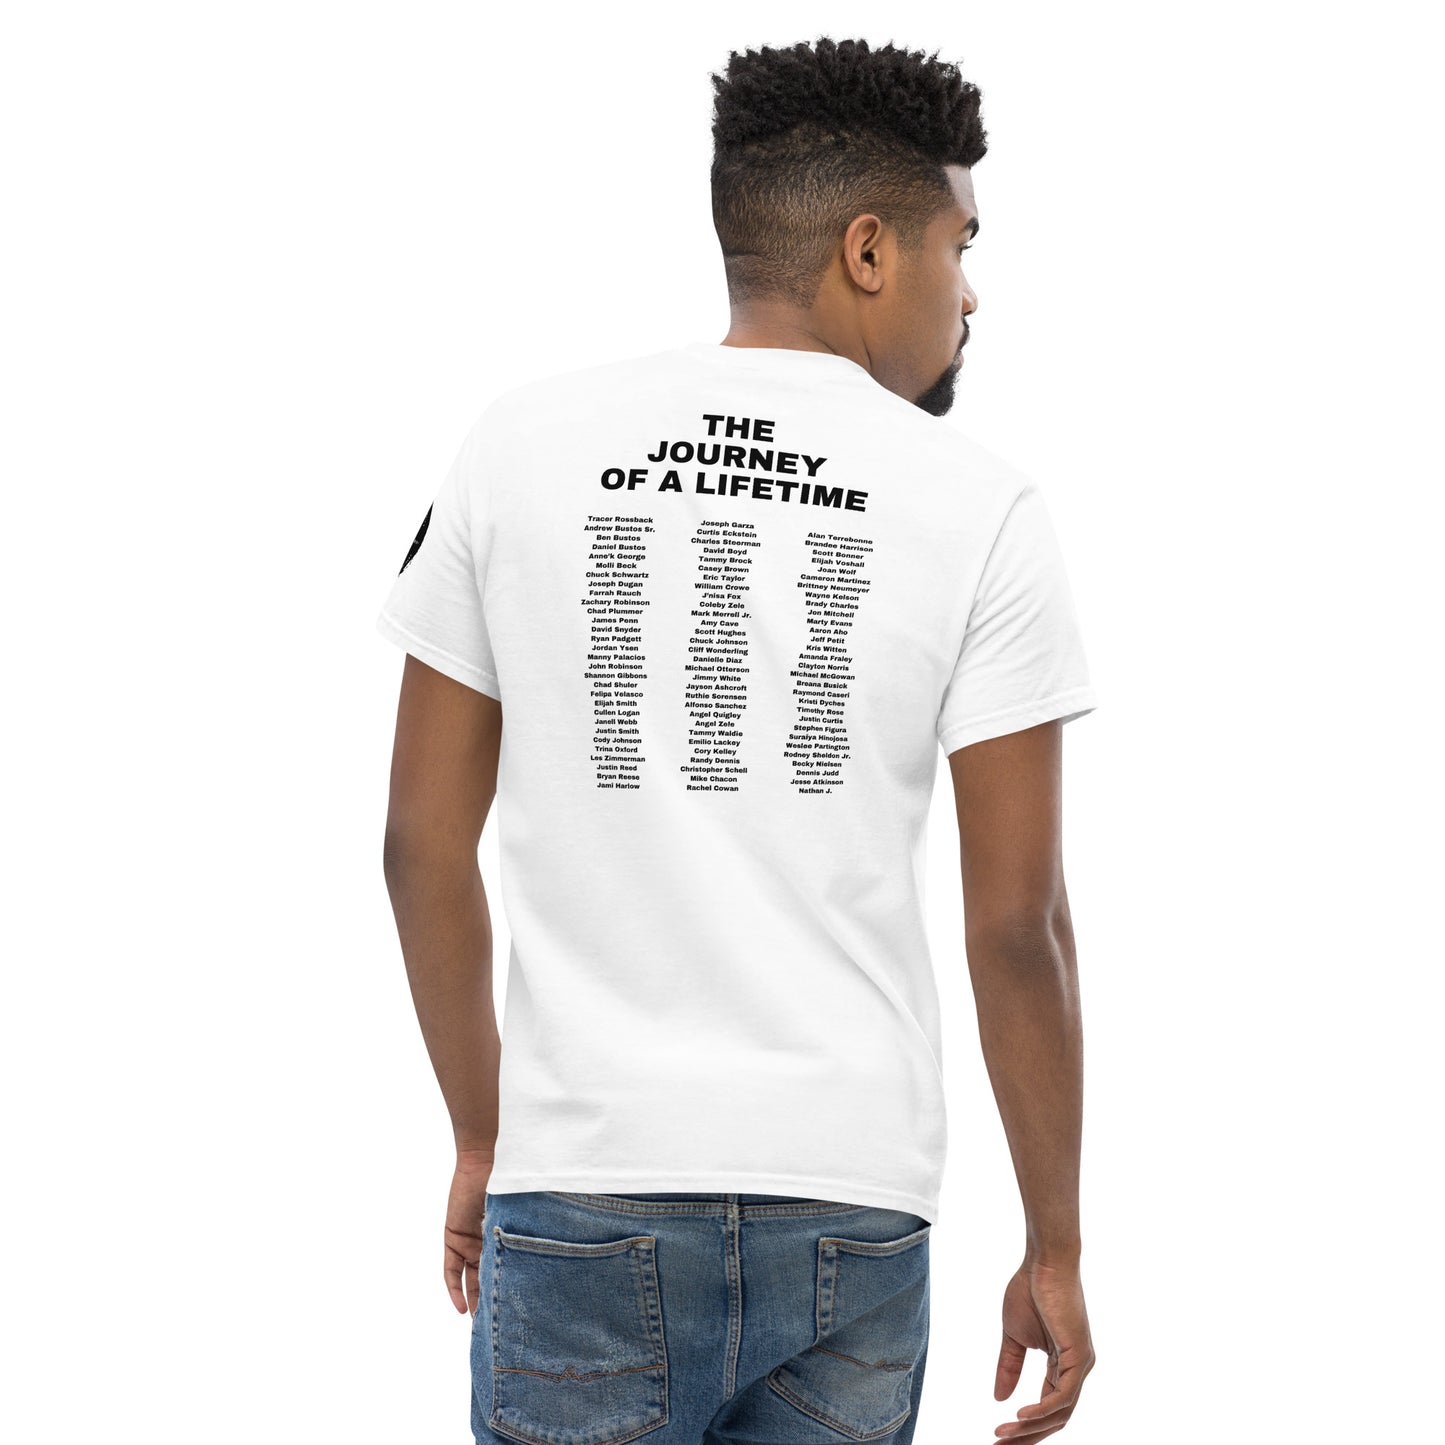 Official A Walking Testimony Shirt Edition 3 (Light Colors)